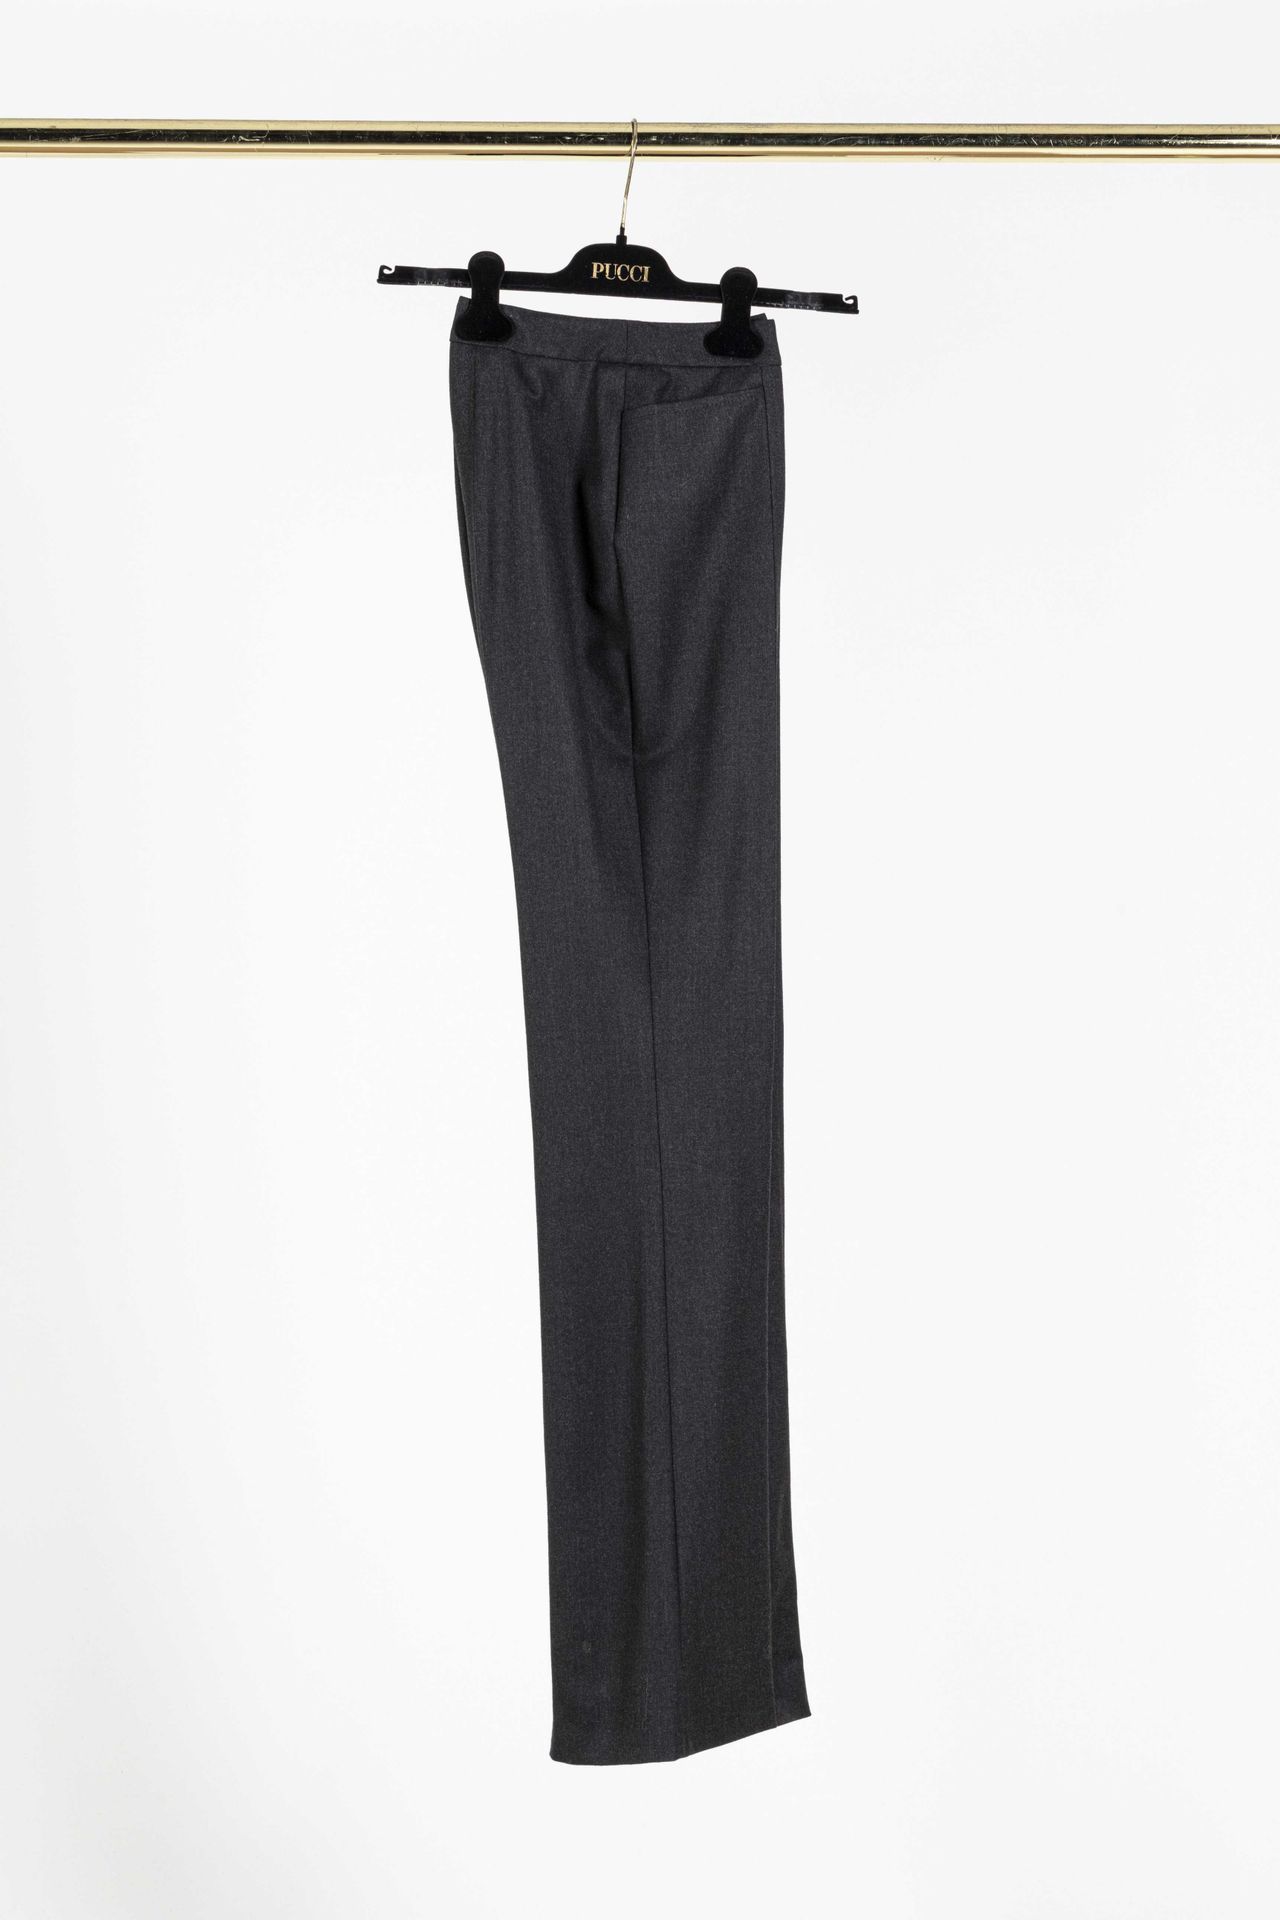 Null ESCADA : straight trousers in dark grey wool with two pockets on the front.&hellip;